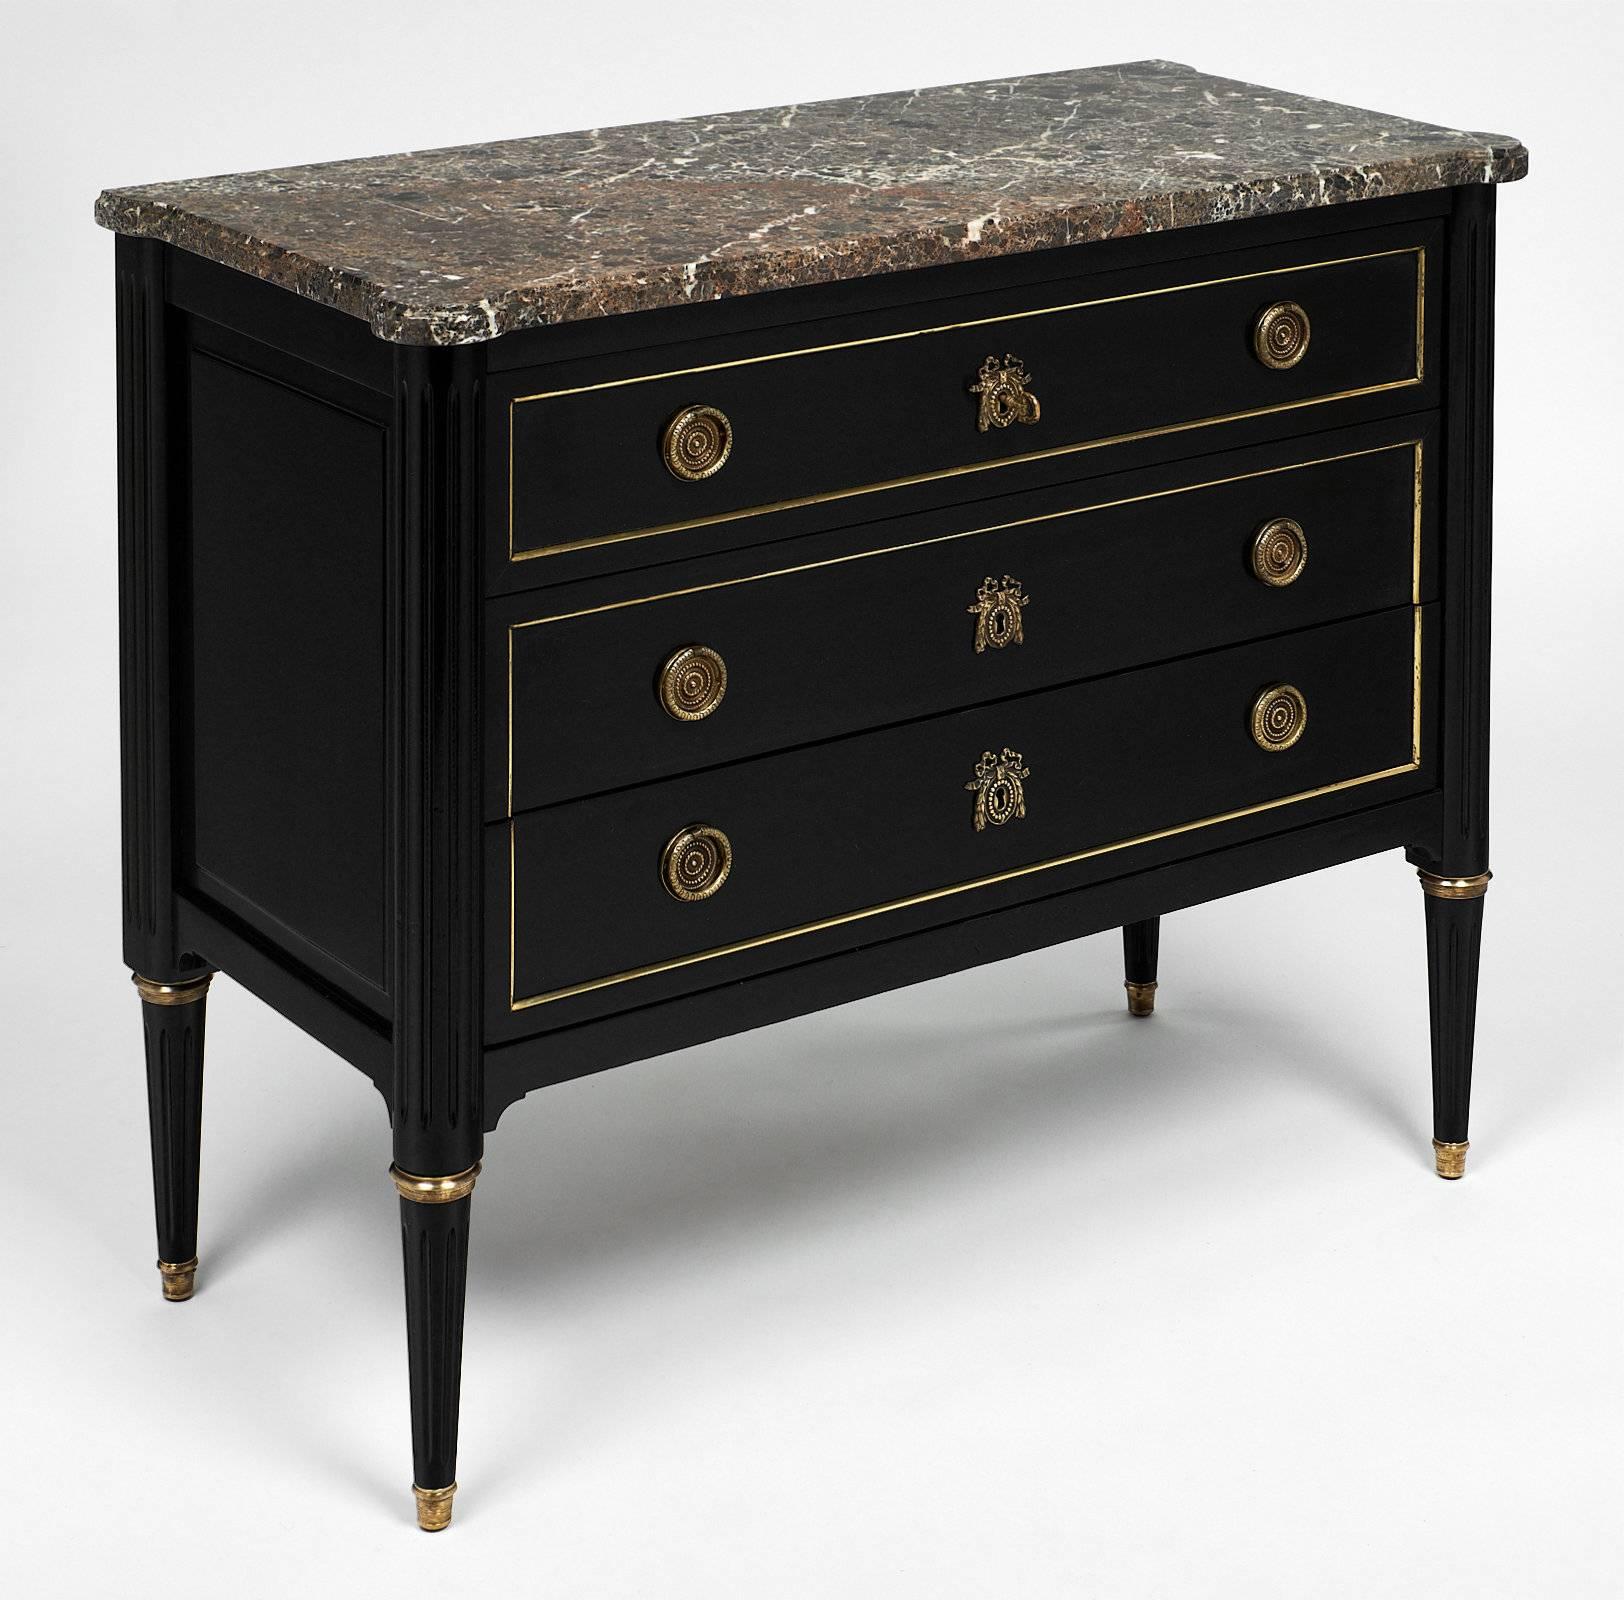 Classic Louis XVI style chest of drawers made of mahogany and featuring a striking Sainte Anne marble slab top. This piece has been ebonized and finished with a lustrous French polish. The drawers are trimmed with brass, and the tapered legs are